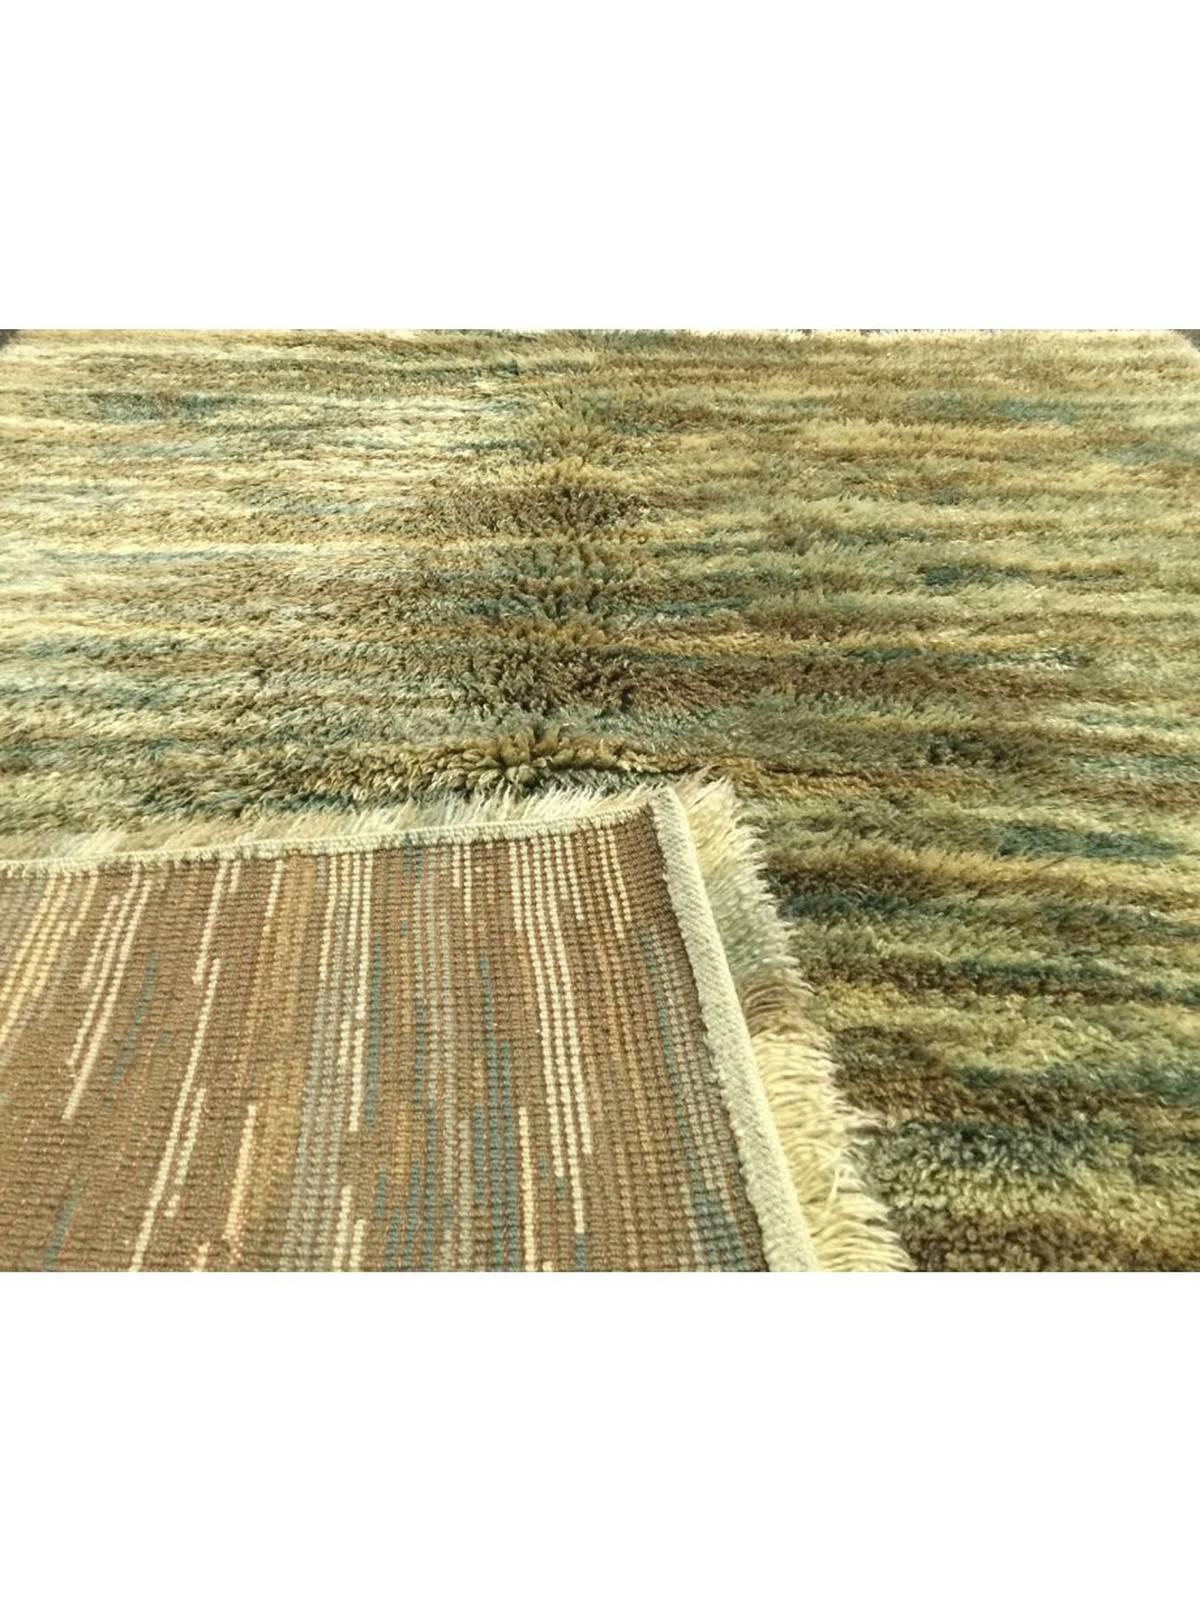 Turkish Green Shag Rug In Excellent Condition For Sale In Vancouver, BC